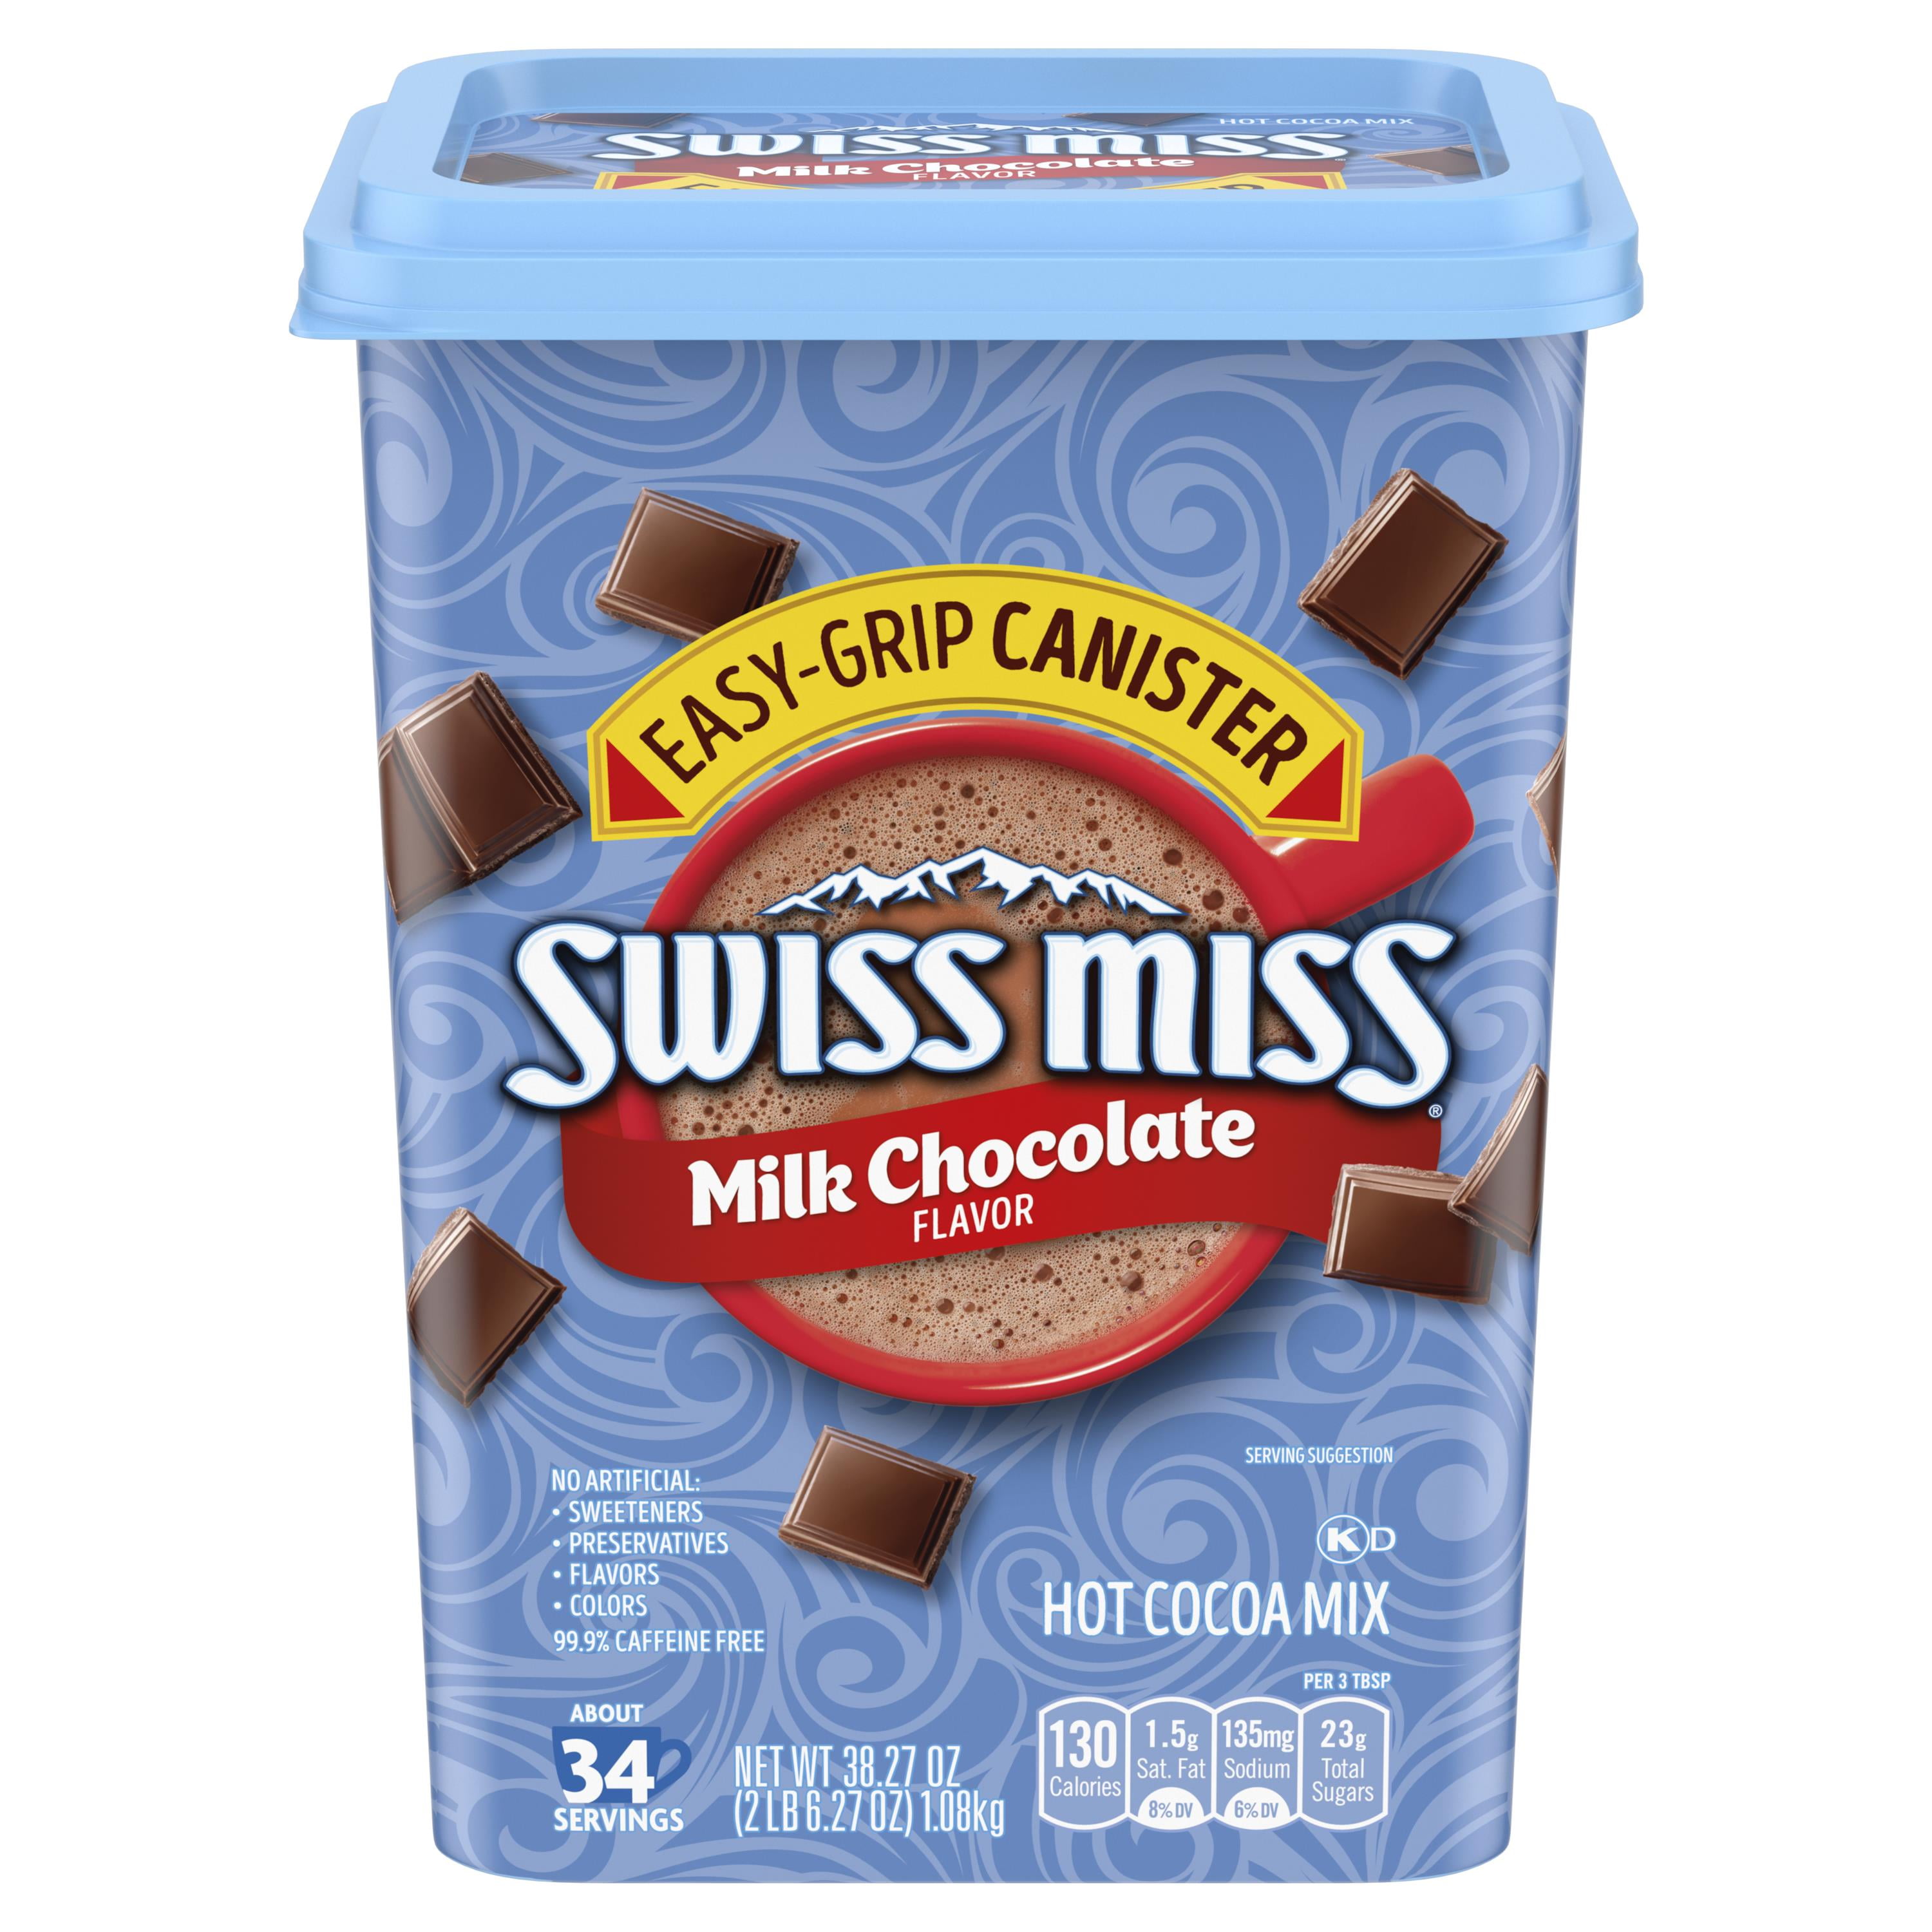 Swiss Miss Milk Chocolate Flavored Hot Cocoa Mix, 38.27 OZ Square Canister